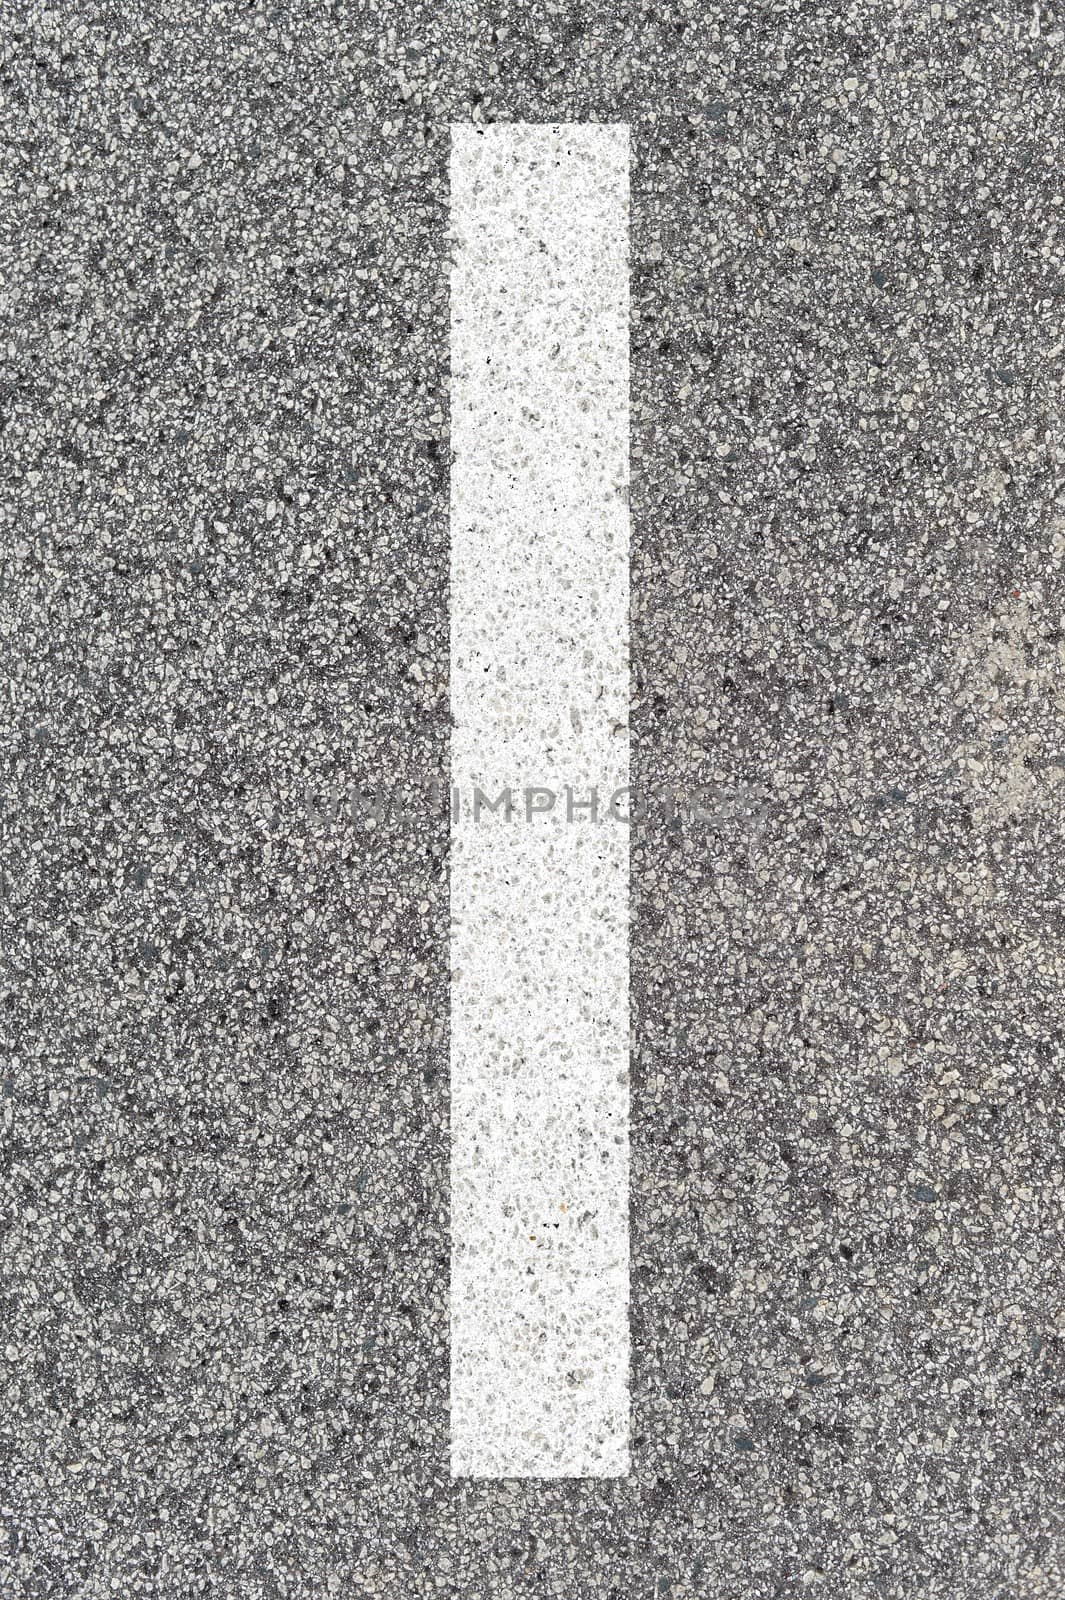 Road Markings by Kitch